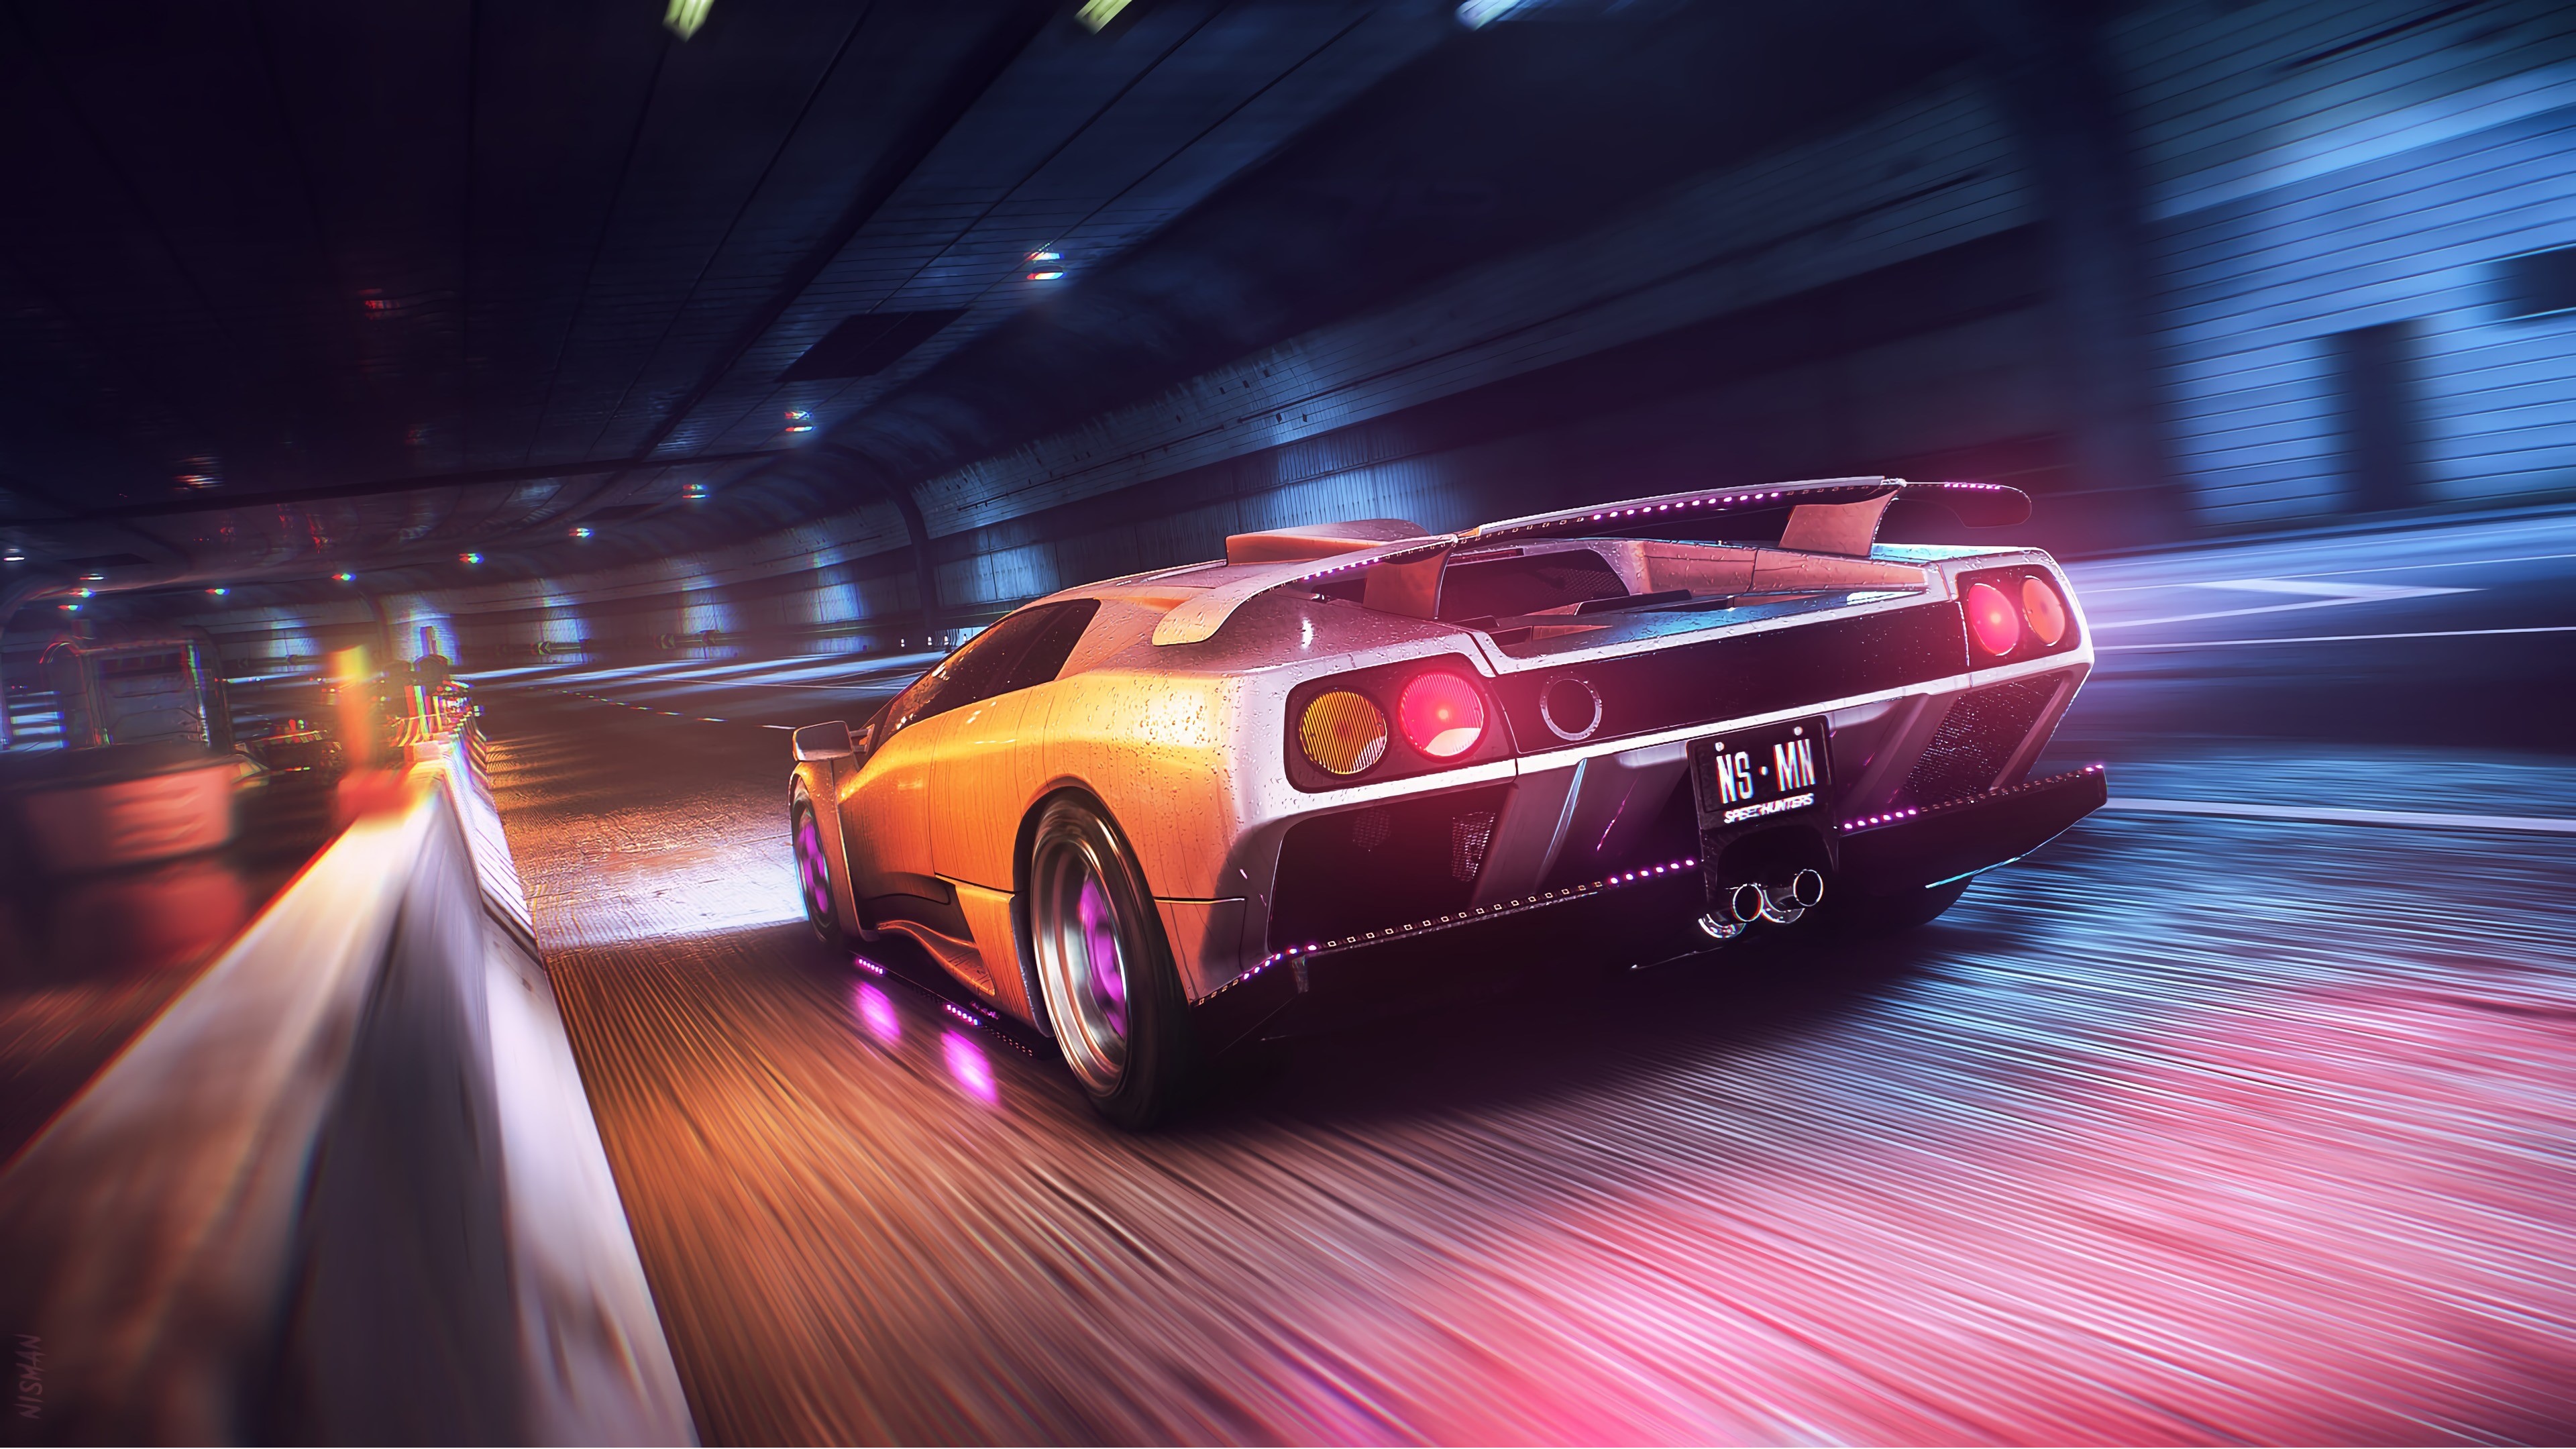 Wallpaper / Car, Sports Car, Wet, Tunnel, Supercars, Speed Limit, Neon, Neon Drive, Lamborghini, Yellow Cars, Race Cars, Race Tracks, Racer Free Download